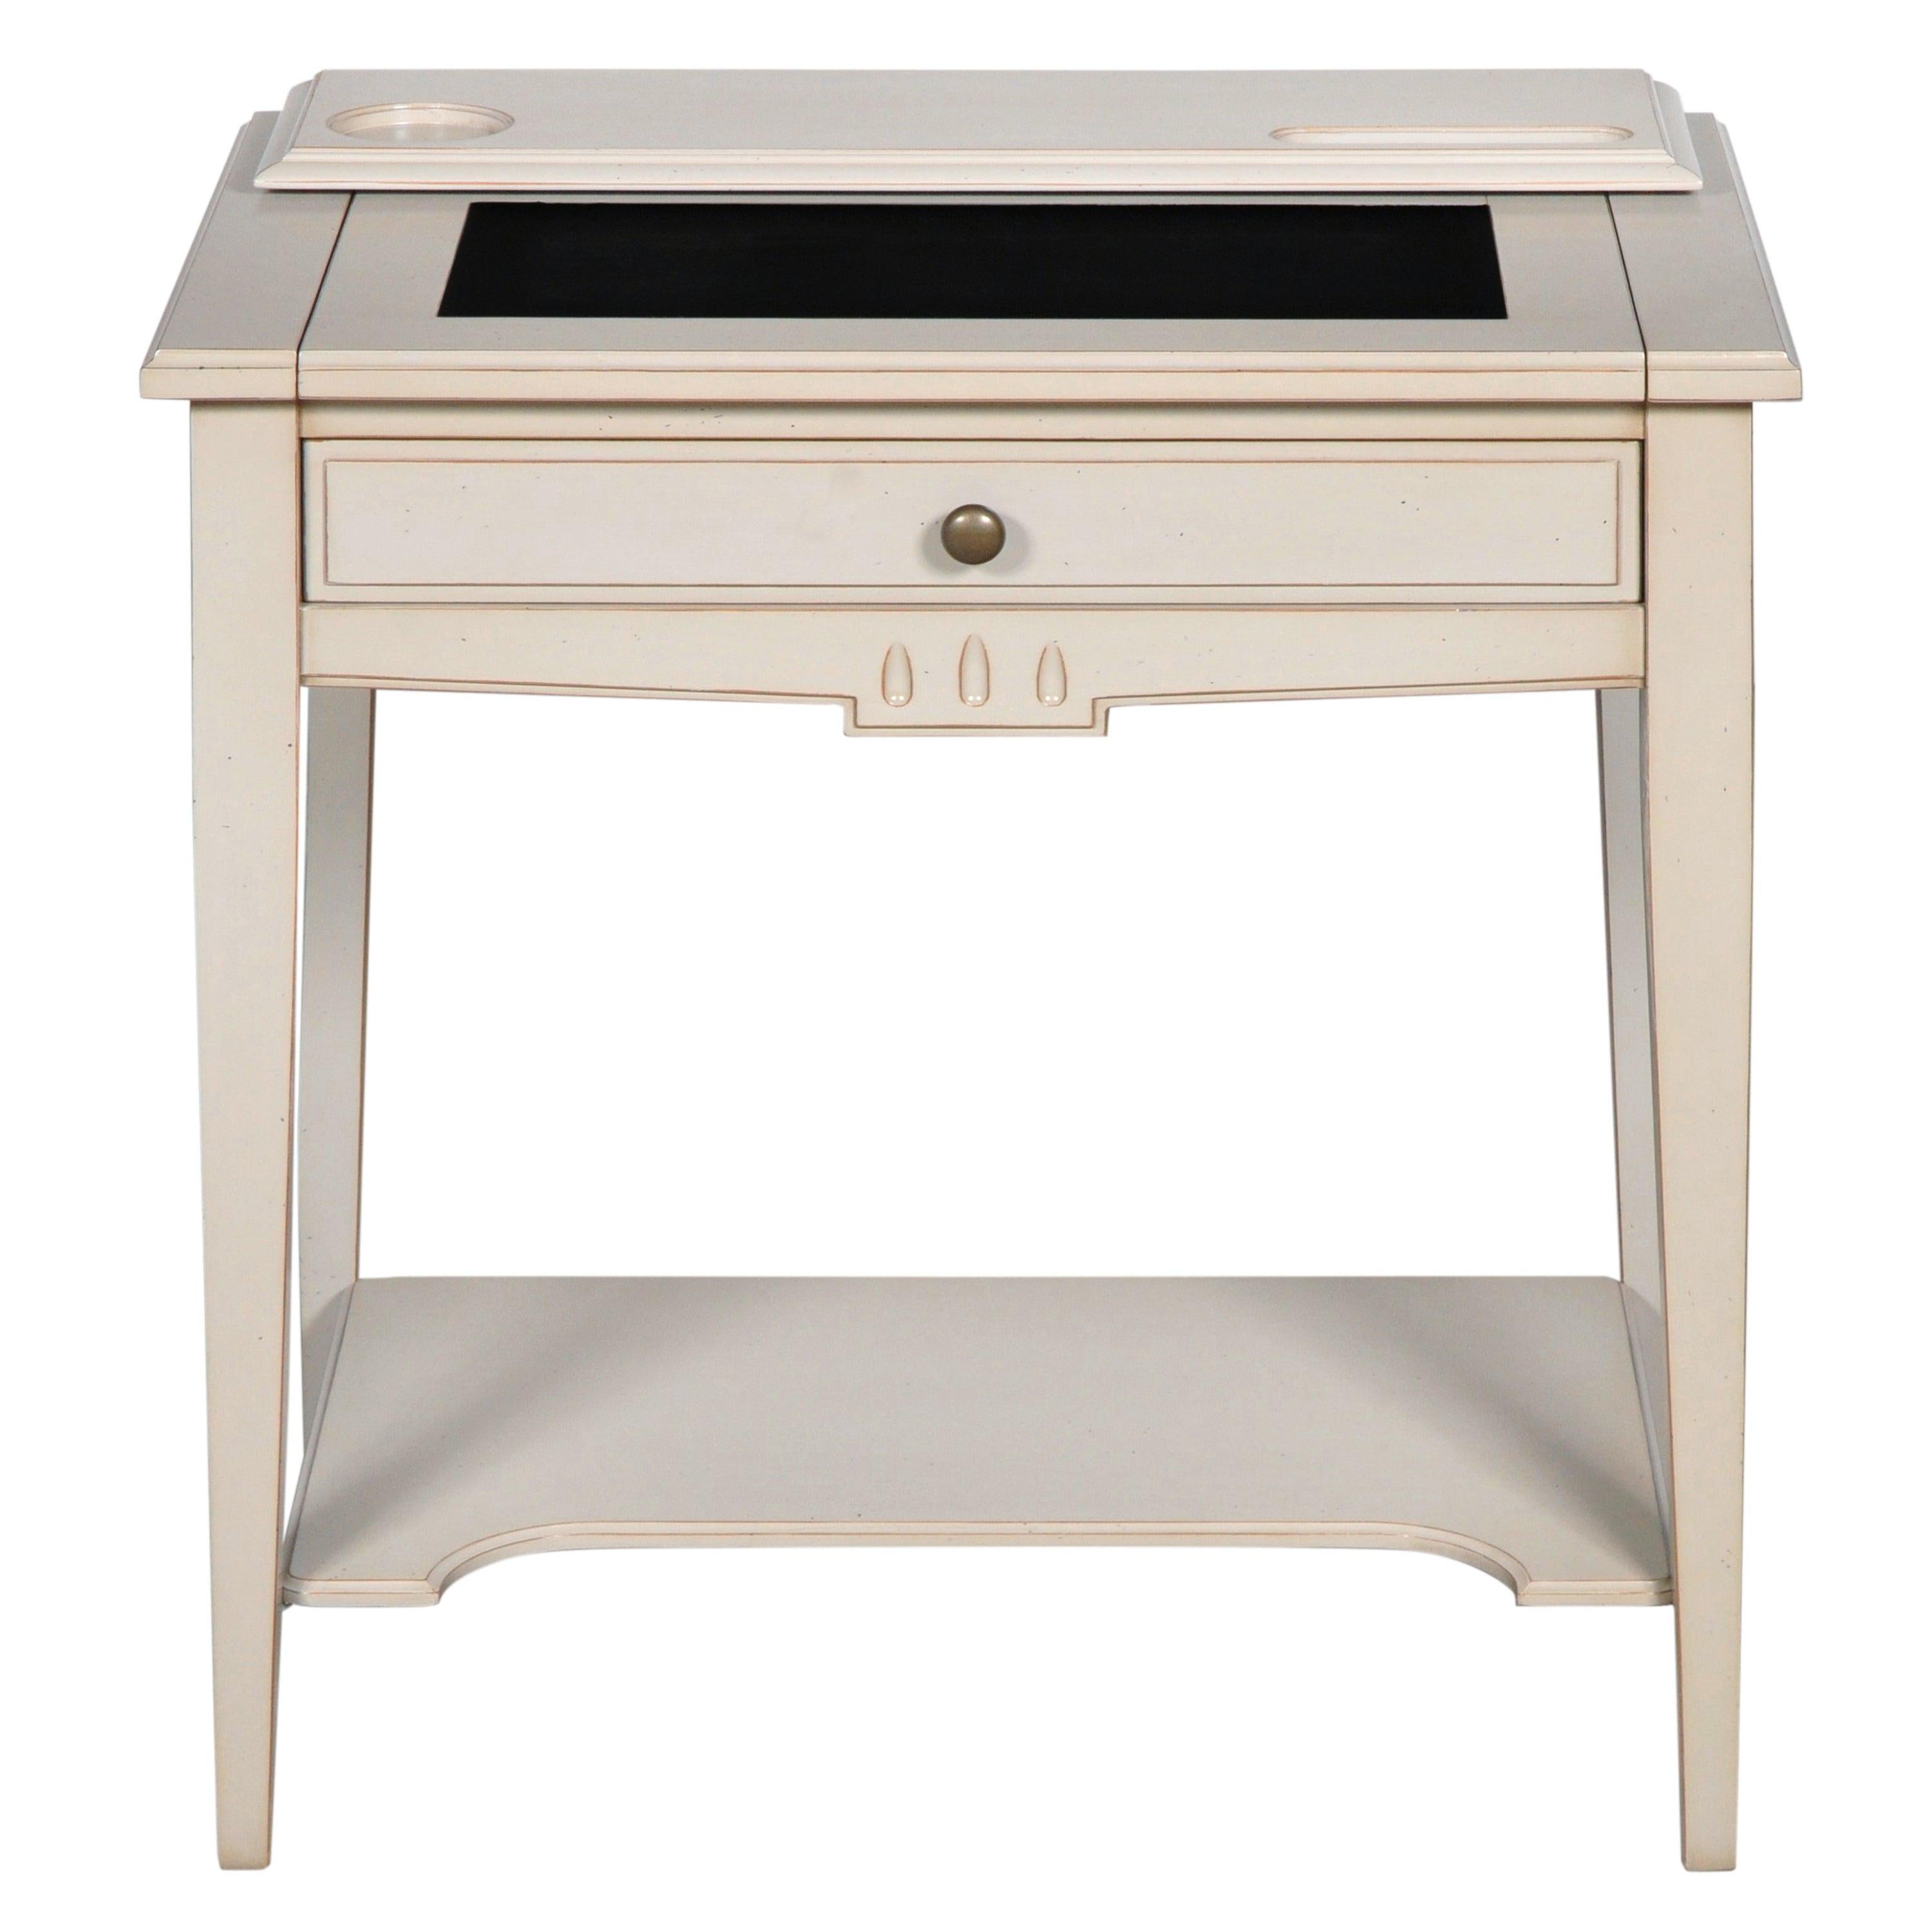 French Directoire style desk with a shelf and leather pad, light grey lacquered